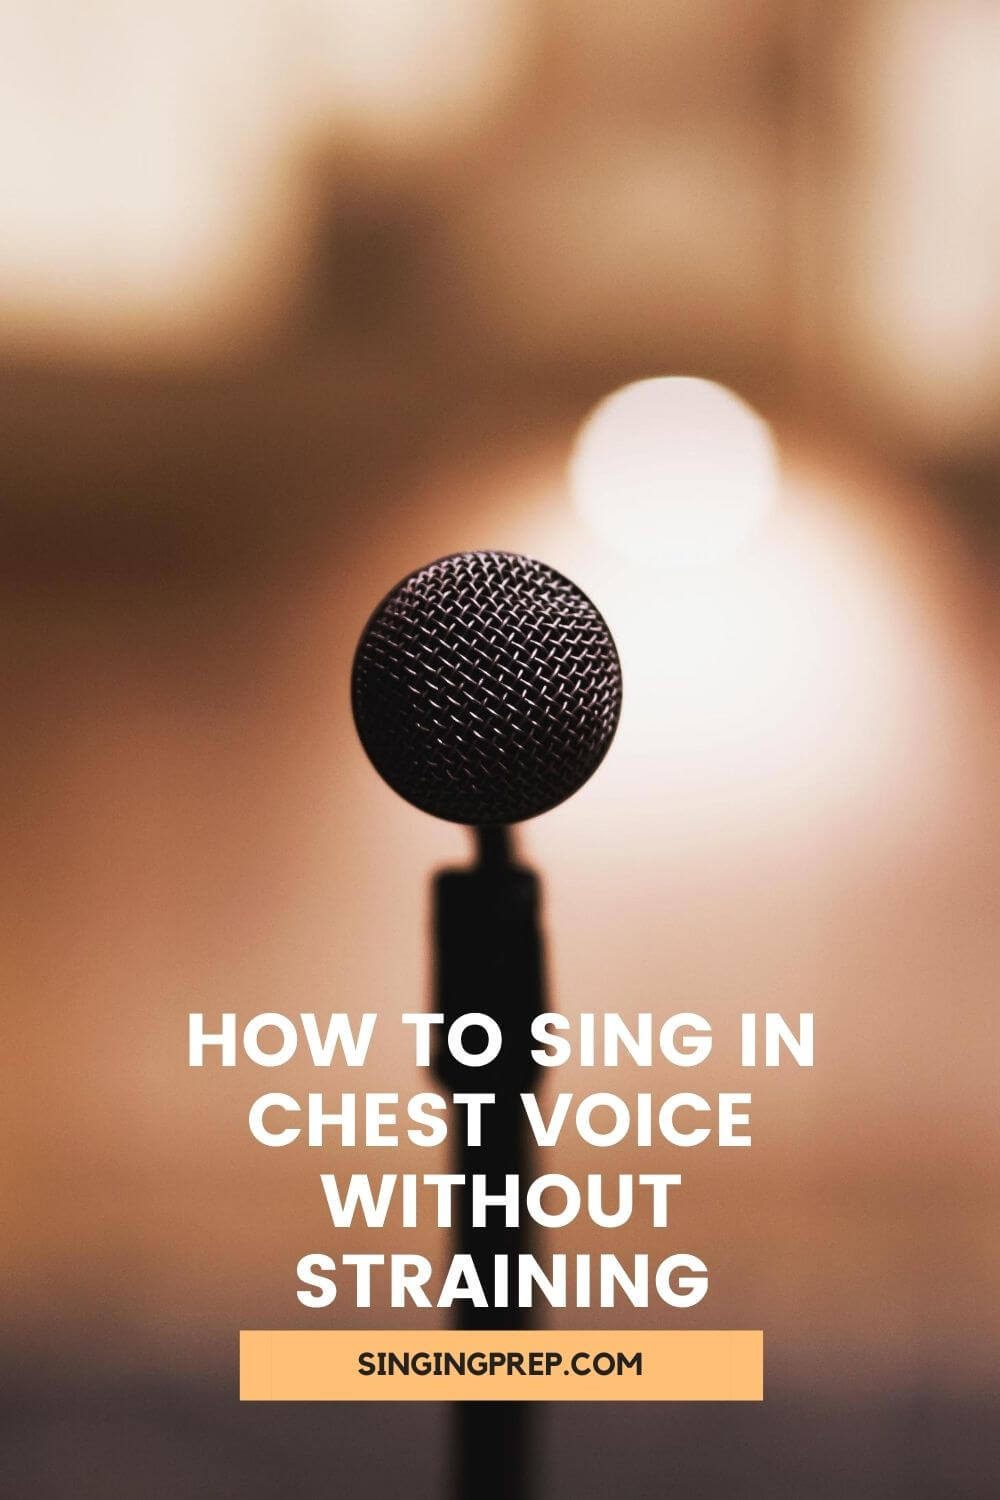 How to sing in chest voice without straining pin